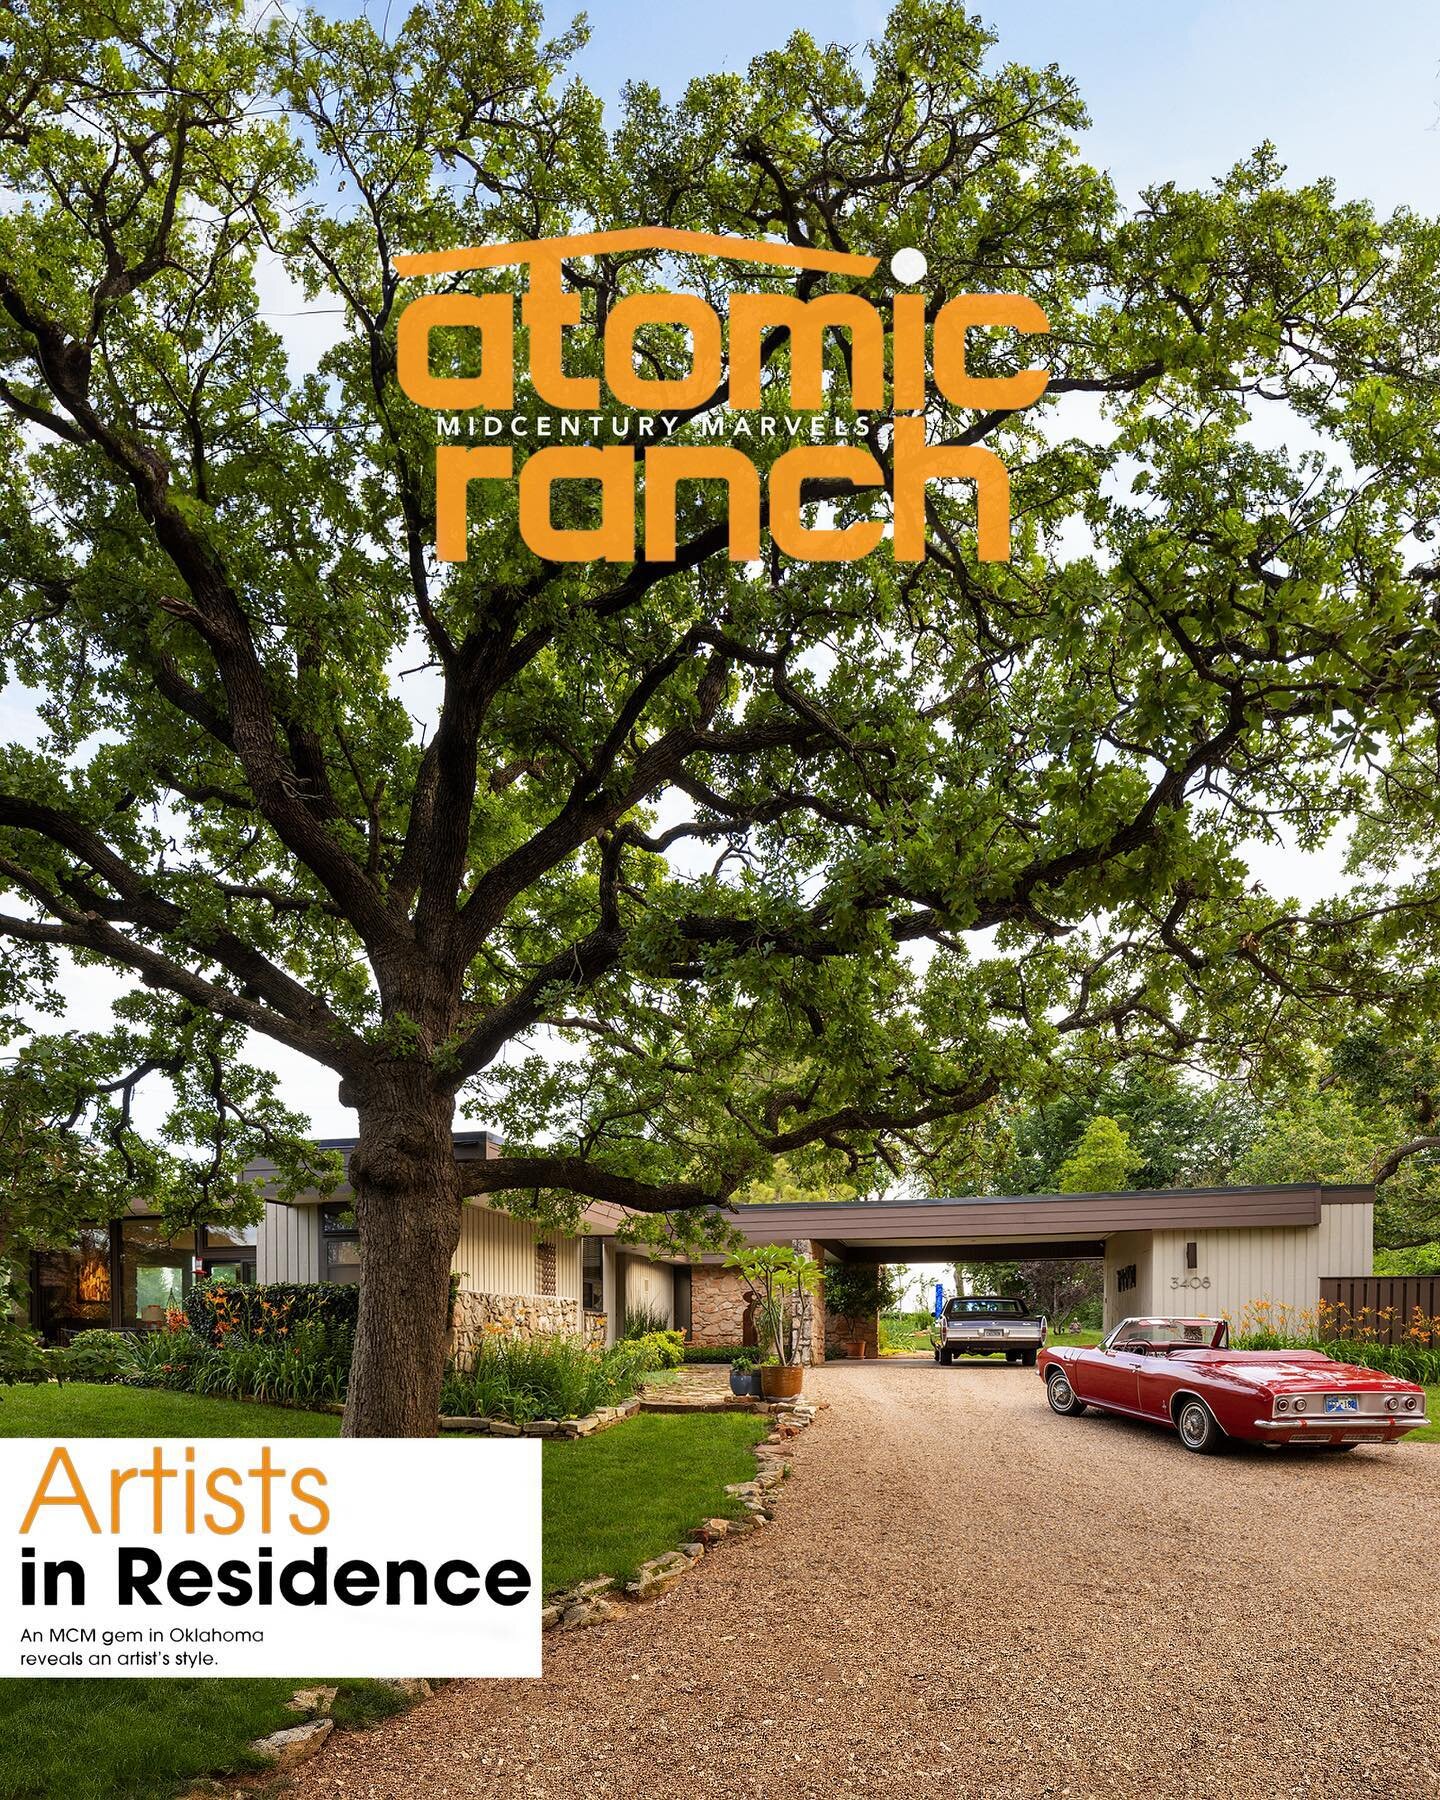 I'm excited to share the release of this fall's issue of @theatomicranch, featuring this Mid-Century Modern gem designed by local legend George Seminoff in 1962. This issue takes you on a 12-page journey into the home of my dear friends and artists, 